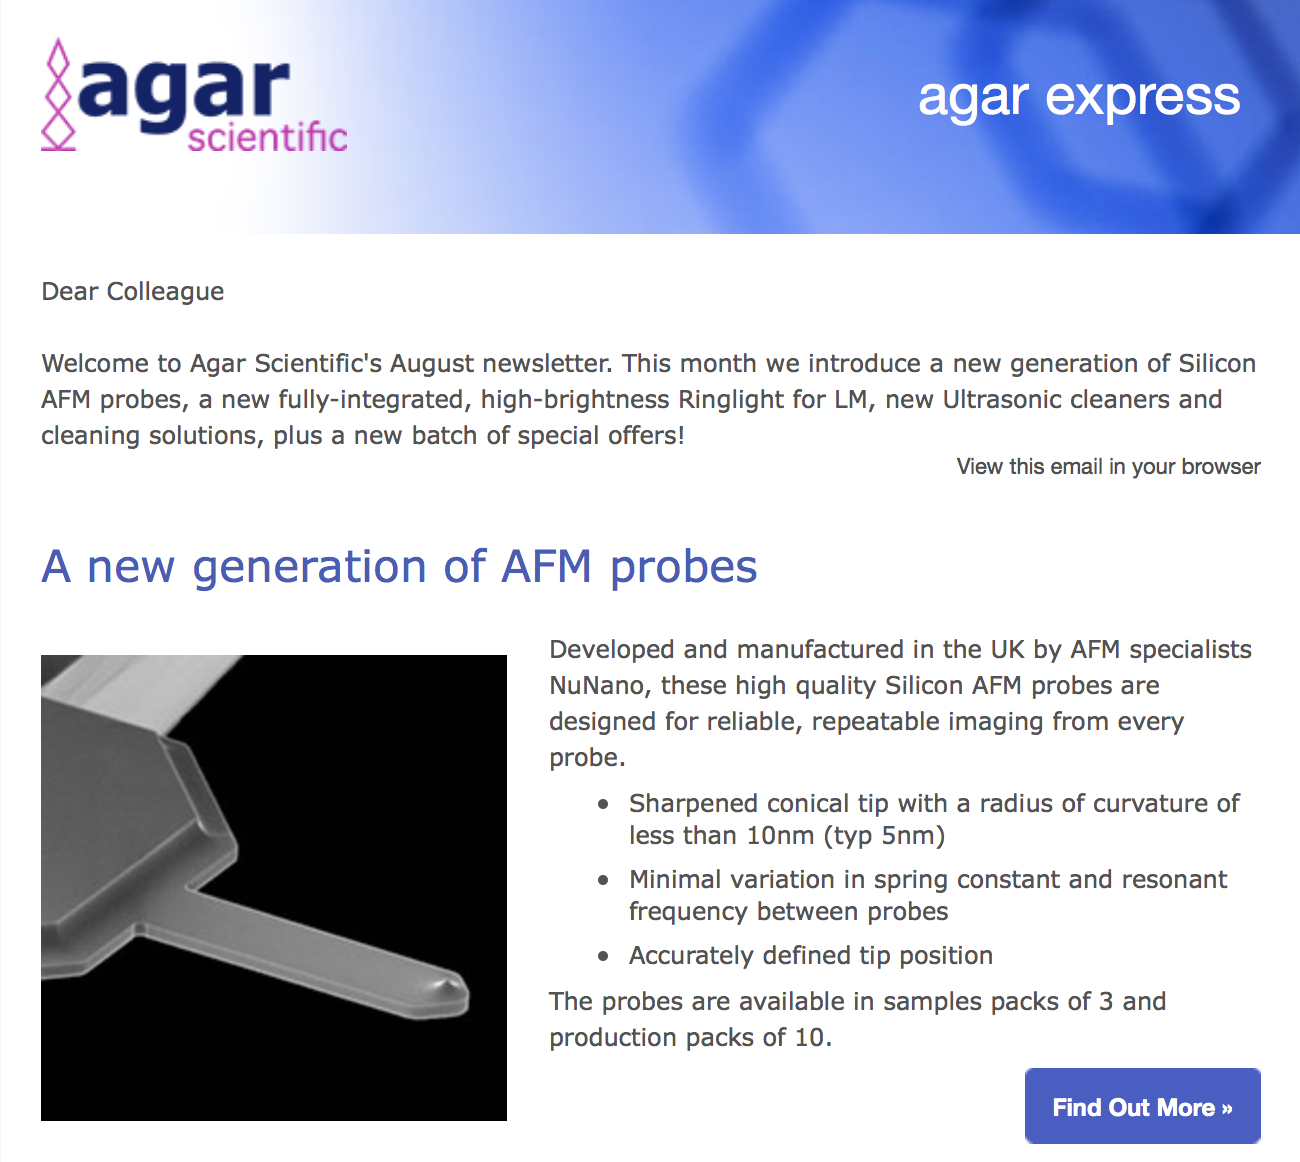 Agar Express August 2017 - new Silicon AFM probes, high-brightness Ringlight for LM, Ultrasonic cleaners & more